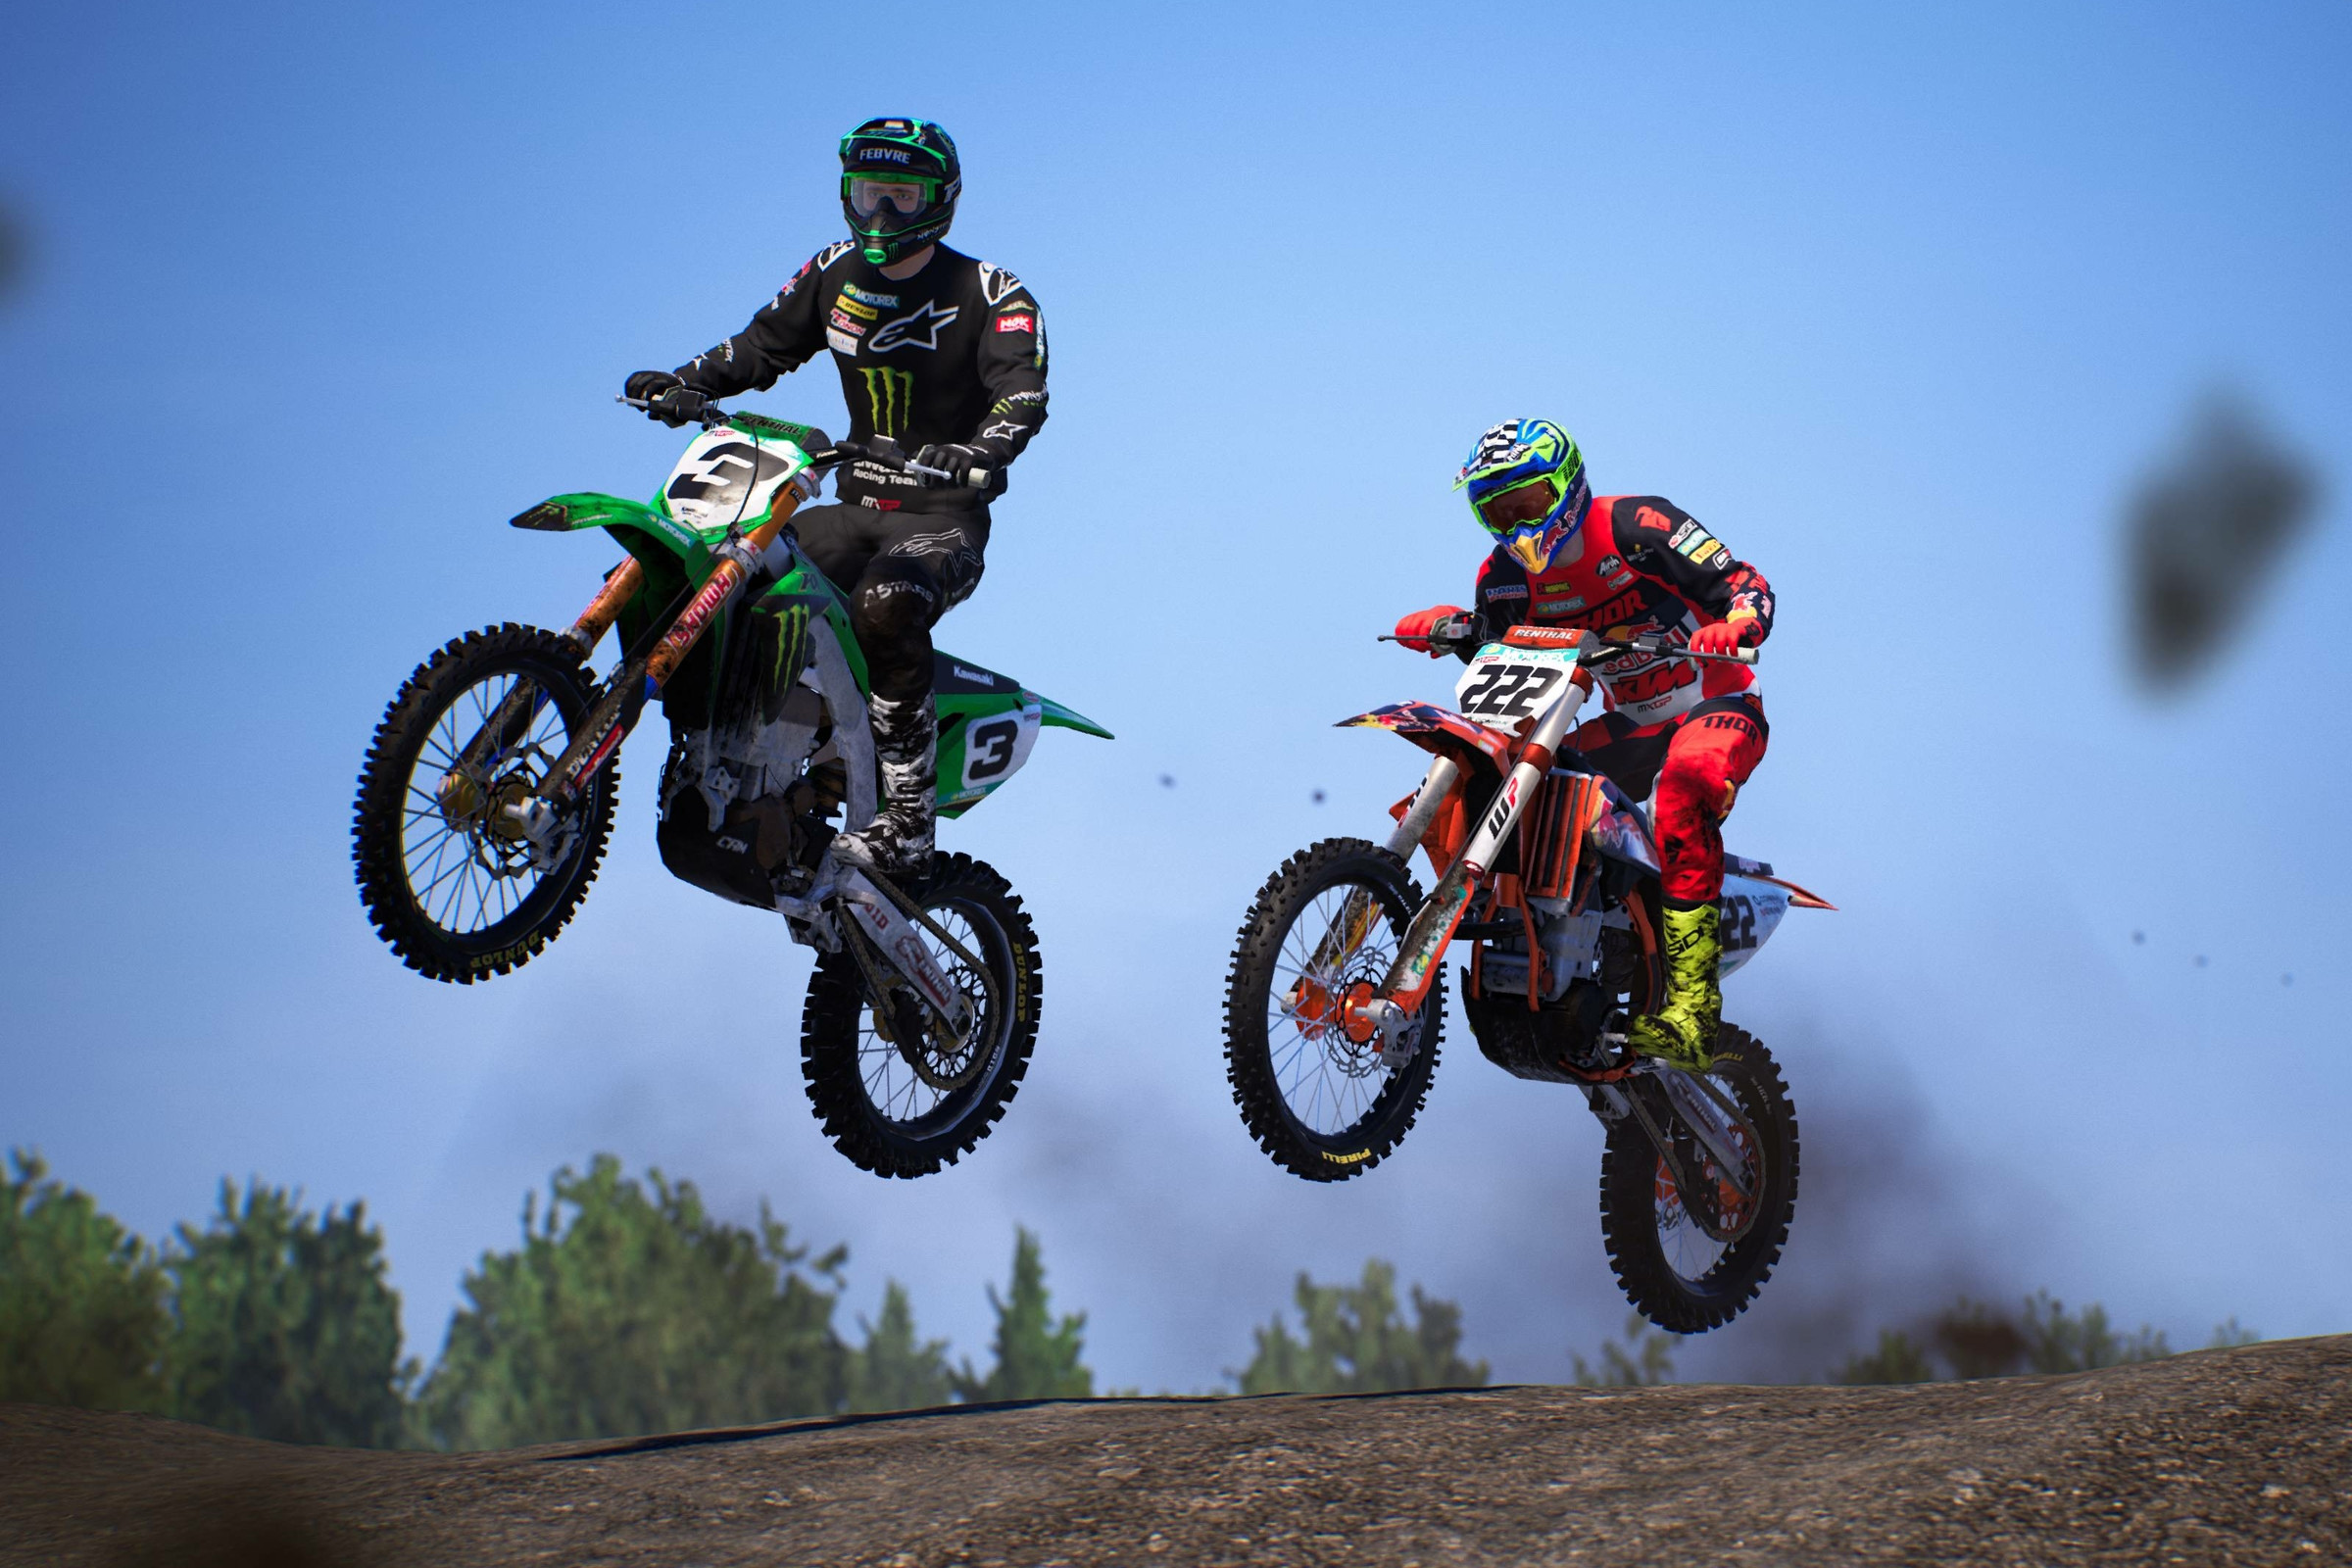 Mxgp 2021 The Official Motocross Videogame Announced From Milestone Racer X